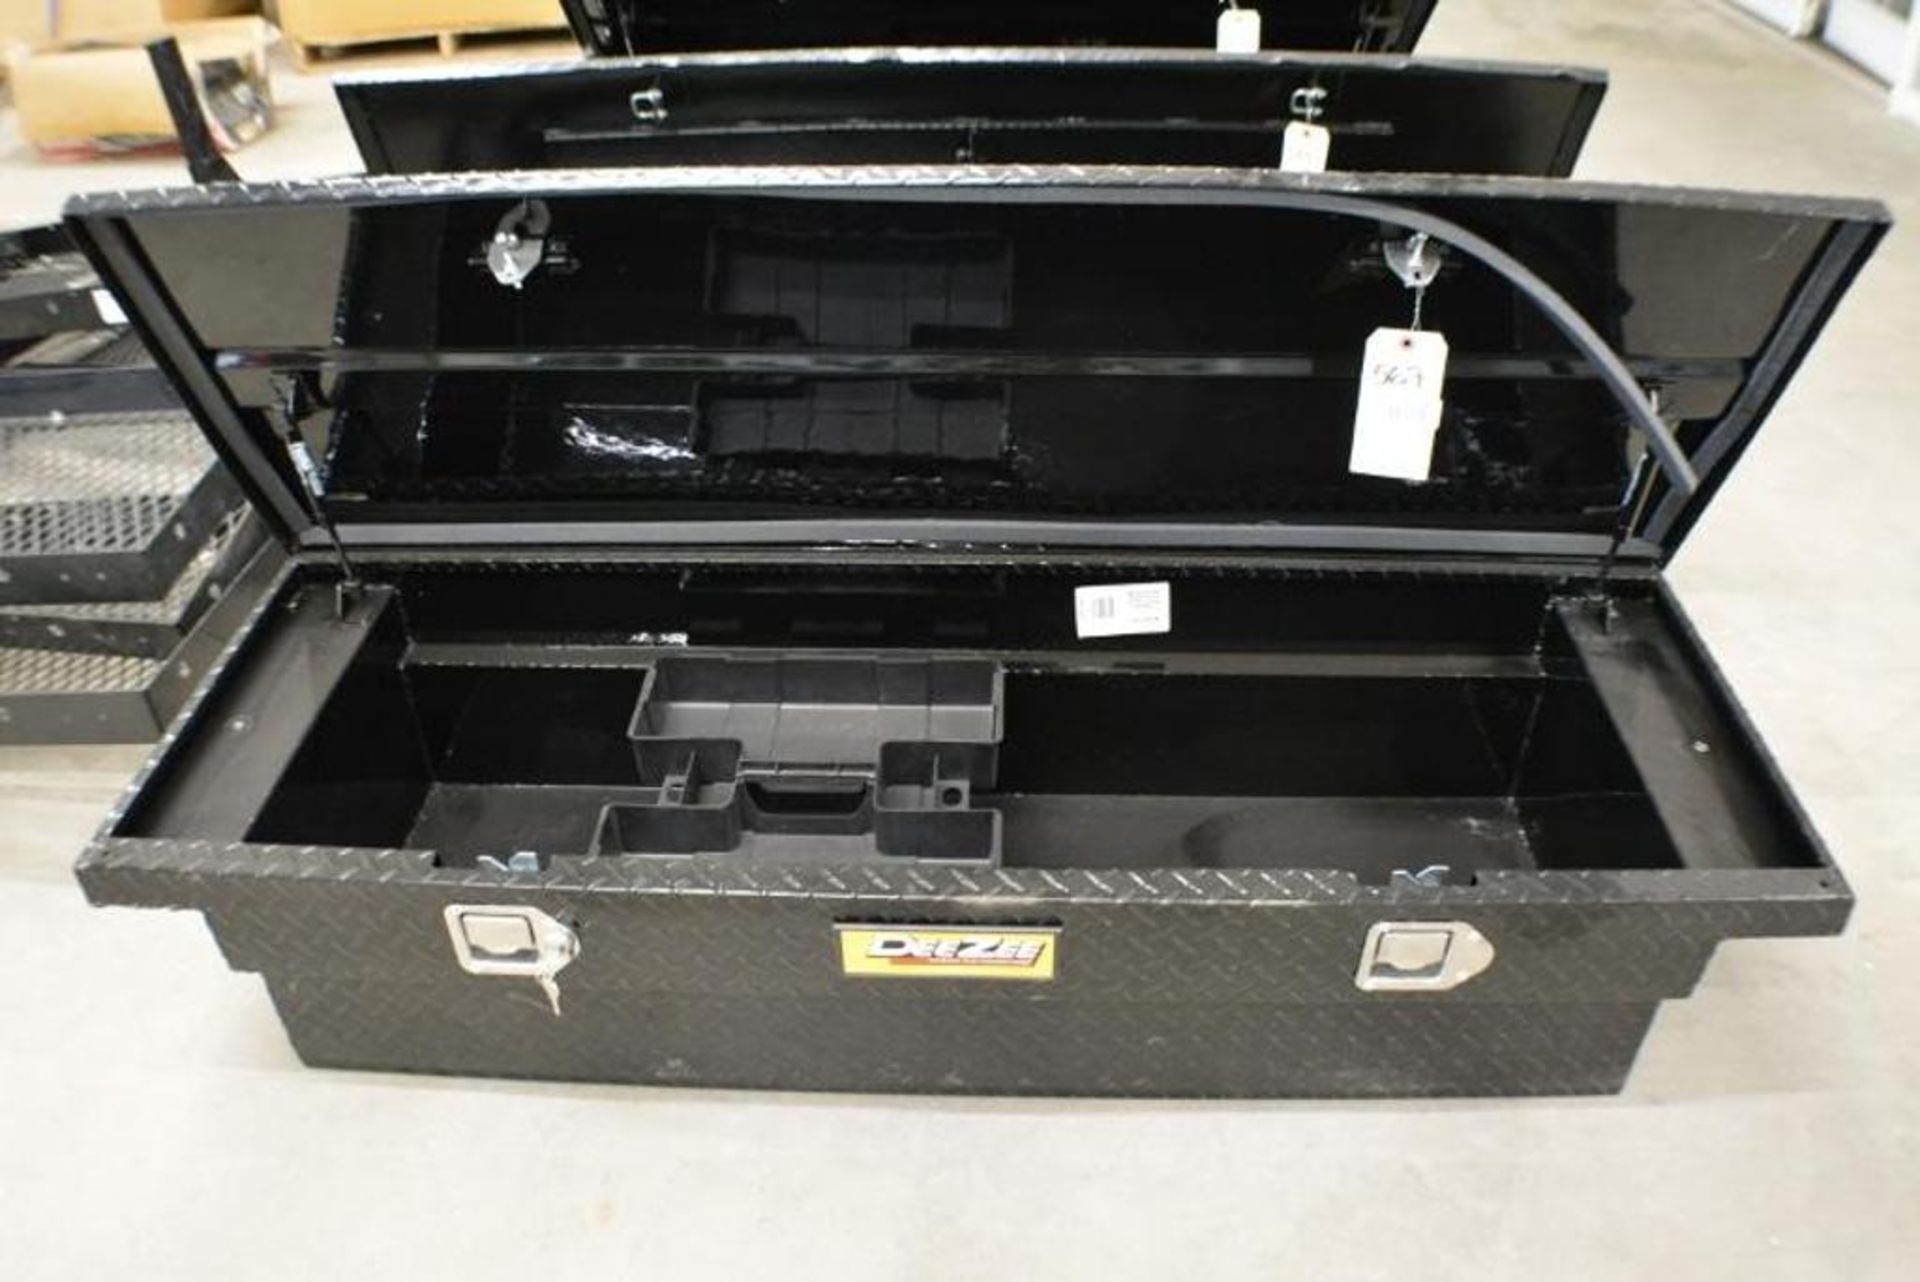 Aluminum tool box 7ft full size. Black color with key.